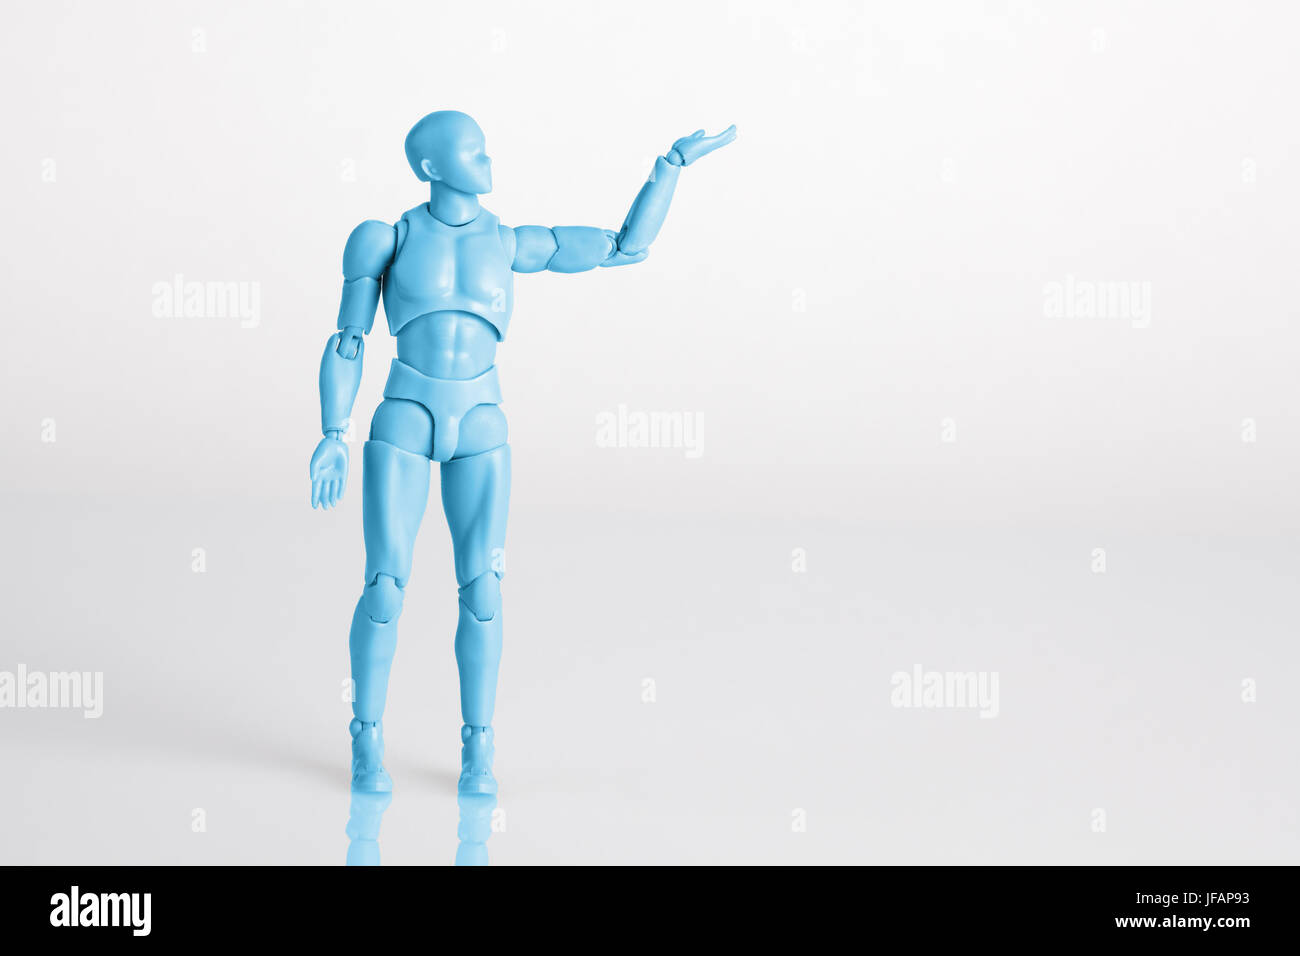 Blue male figurine standing on white reflective table holding one hand up. Making a decision concept with copy space Stock Photo